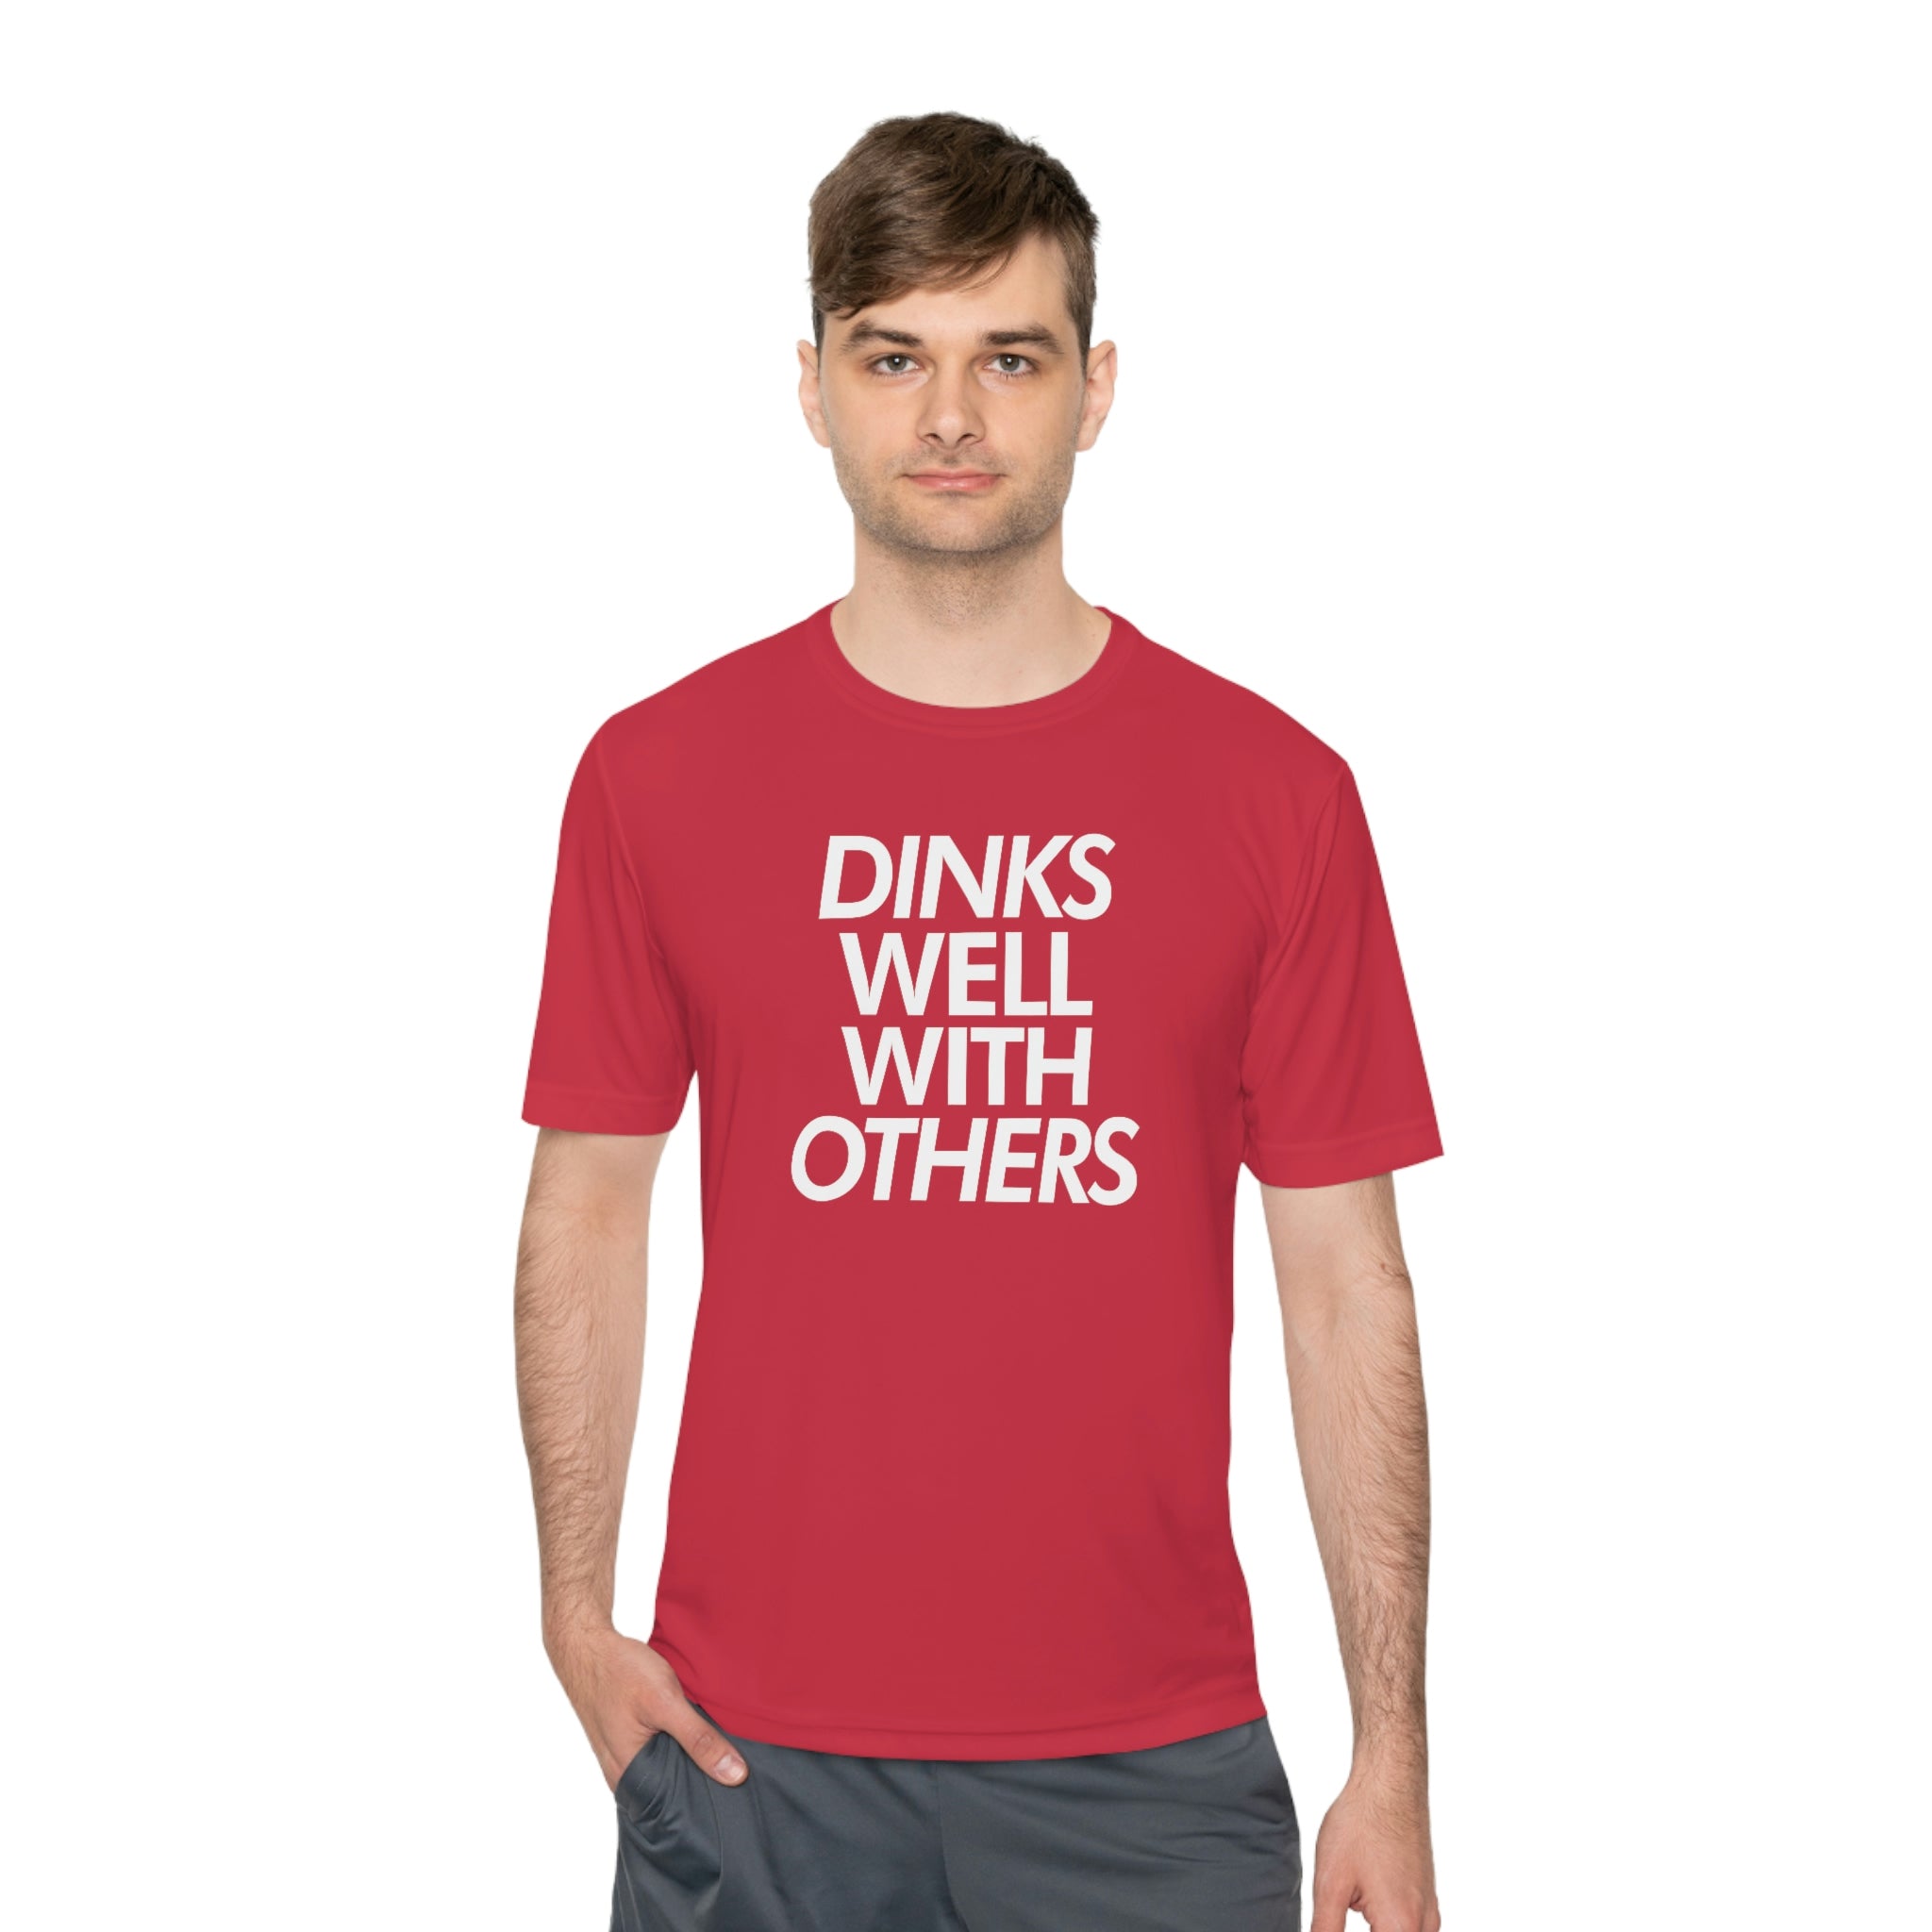 man wearing coral red dinks well with others athletic performance pickleball shirt apparel front view